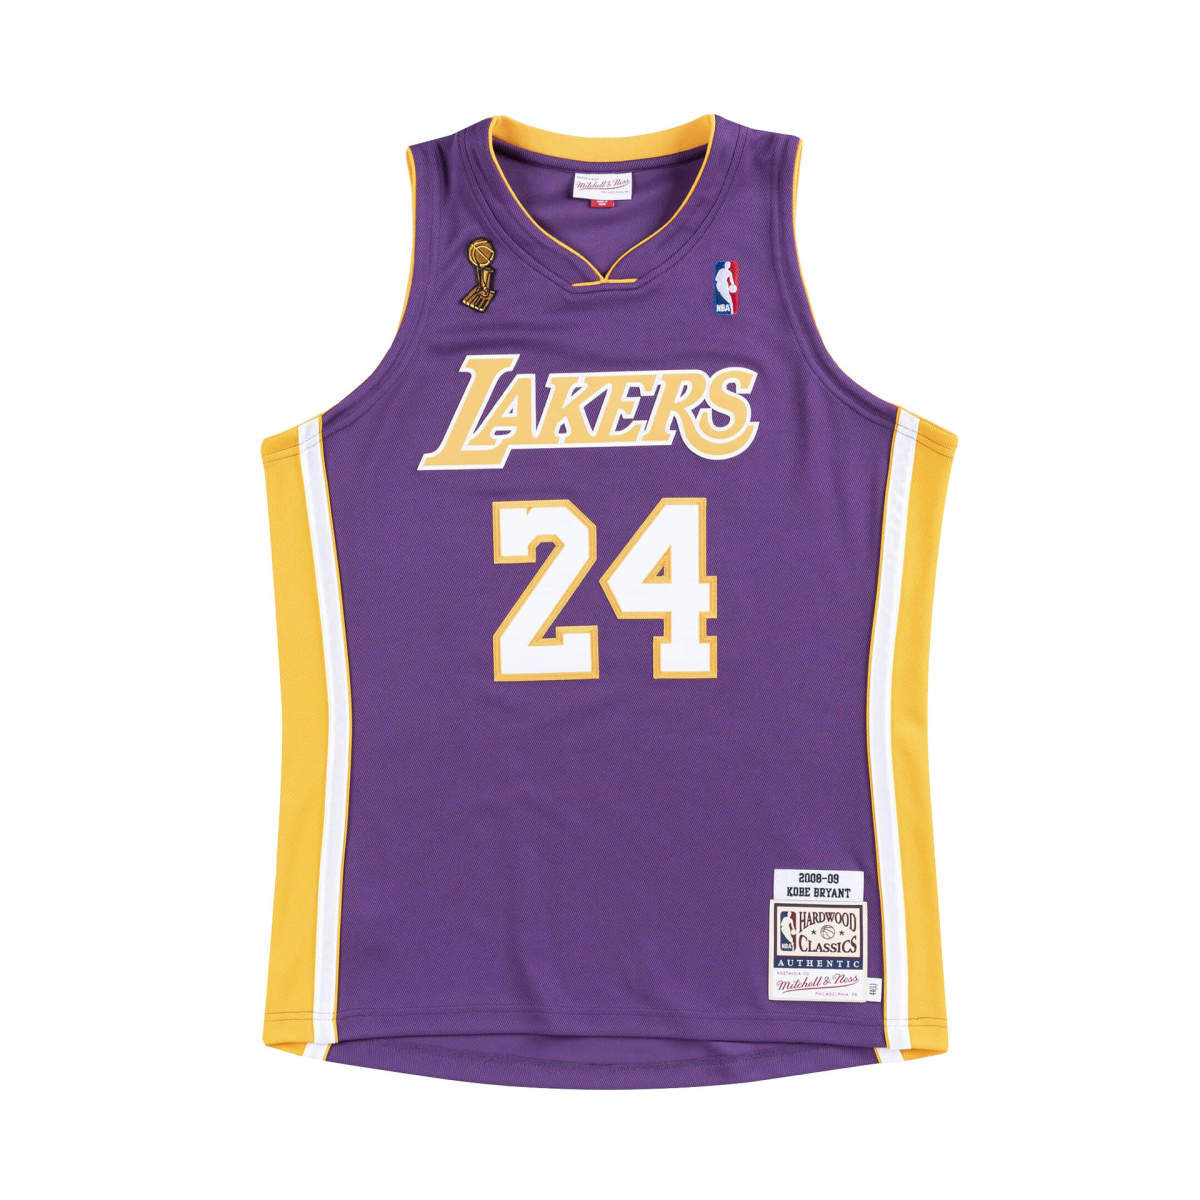 Los angeles lakers alternate authentic jersey 2008-09 bryant